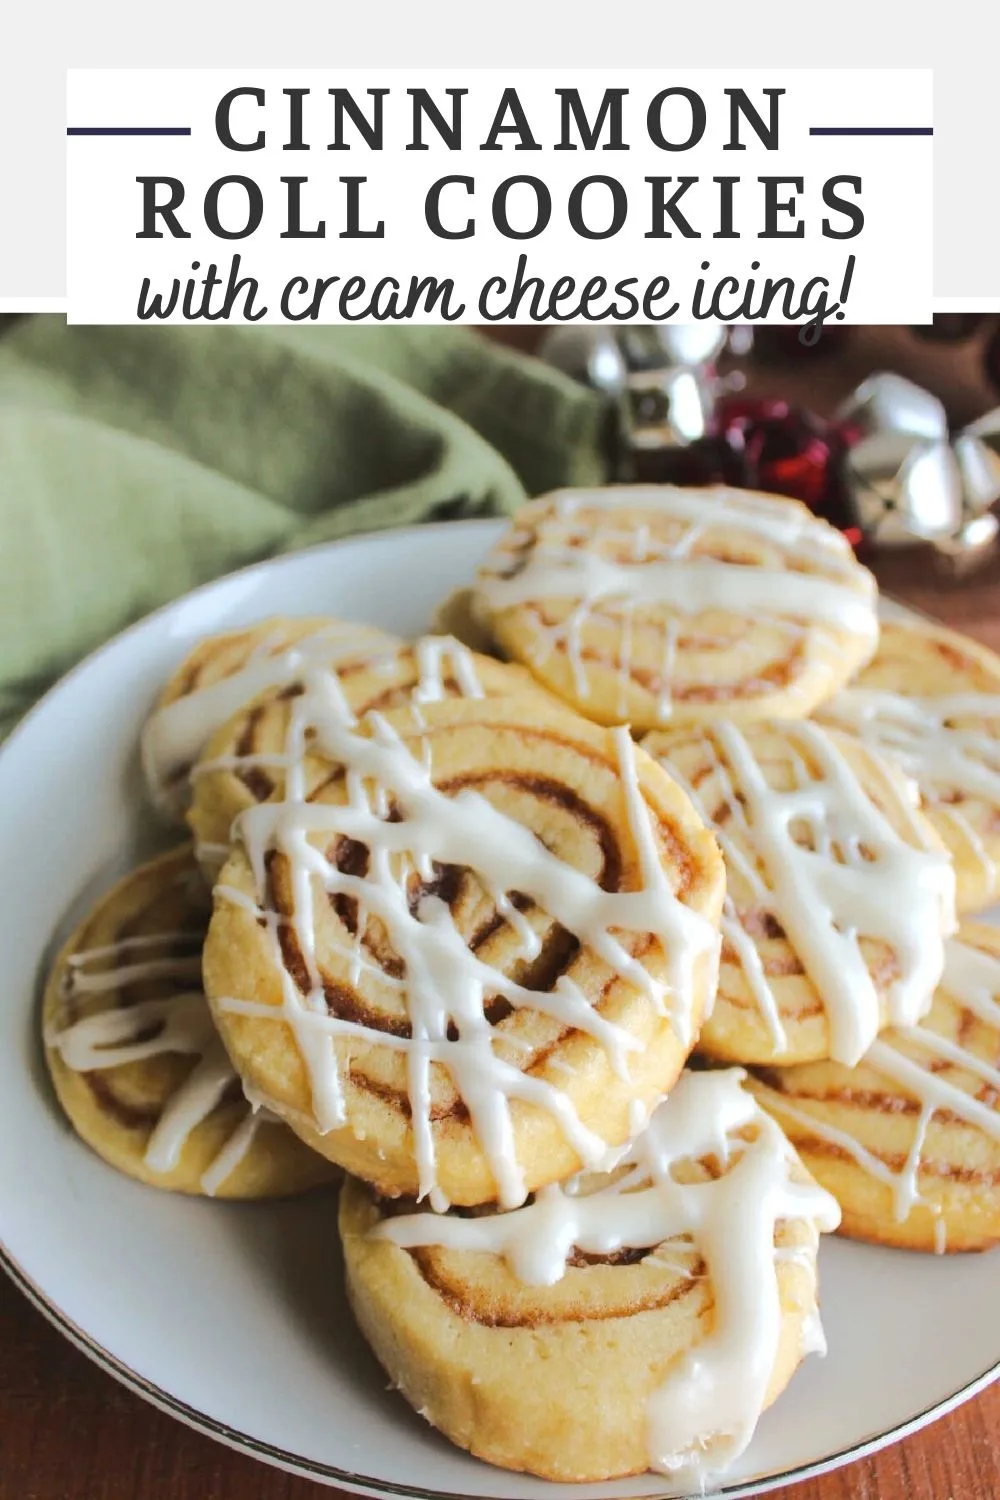 If you love cinnamon rolls and sugar cookies, you are going to love this delicious marriage of the two. They have slightly crisp edges, soft centers and plenty of cinnamon filling. These cookies are cute, delicious and perfect for almost any occasion.